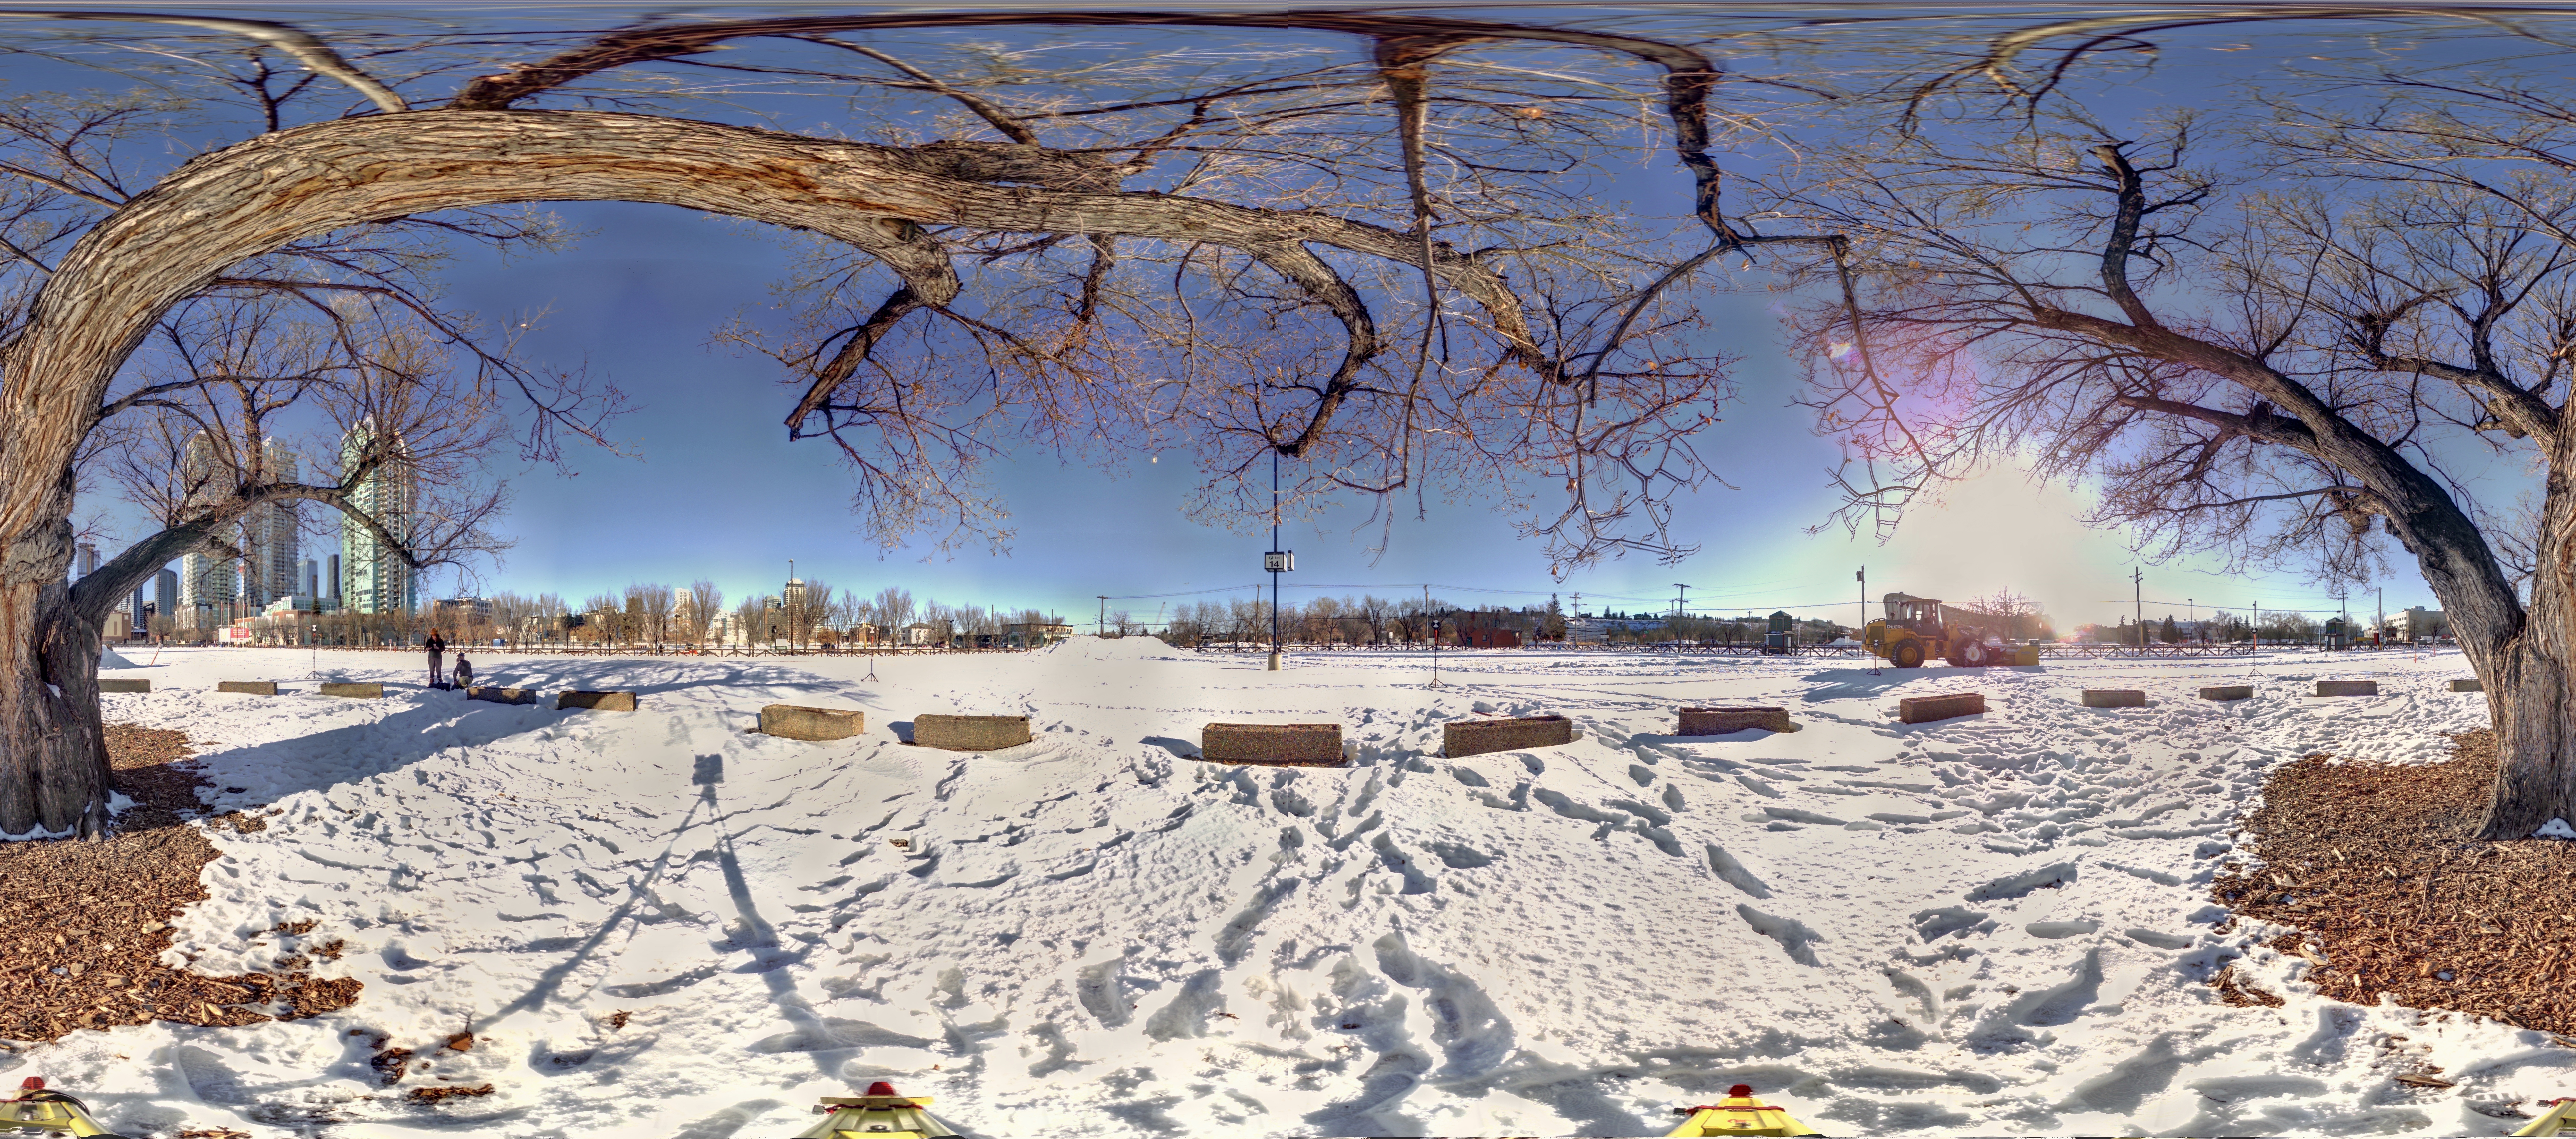 Panoramic view of the Stampede Elm and downtown Calgary from Z+F 5010X laser scanner, scanning location 11